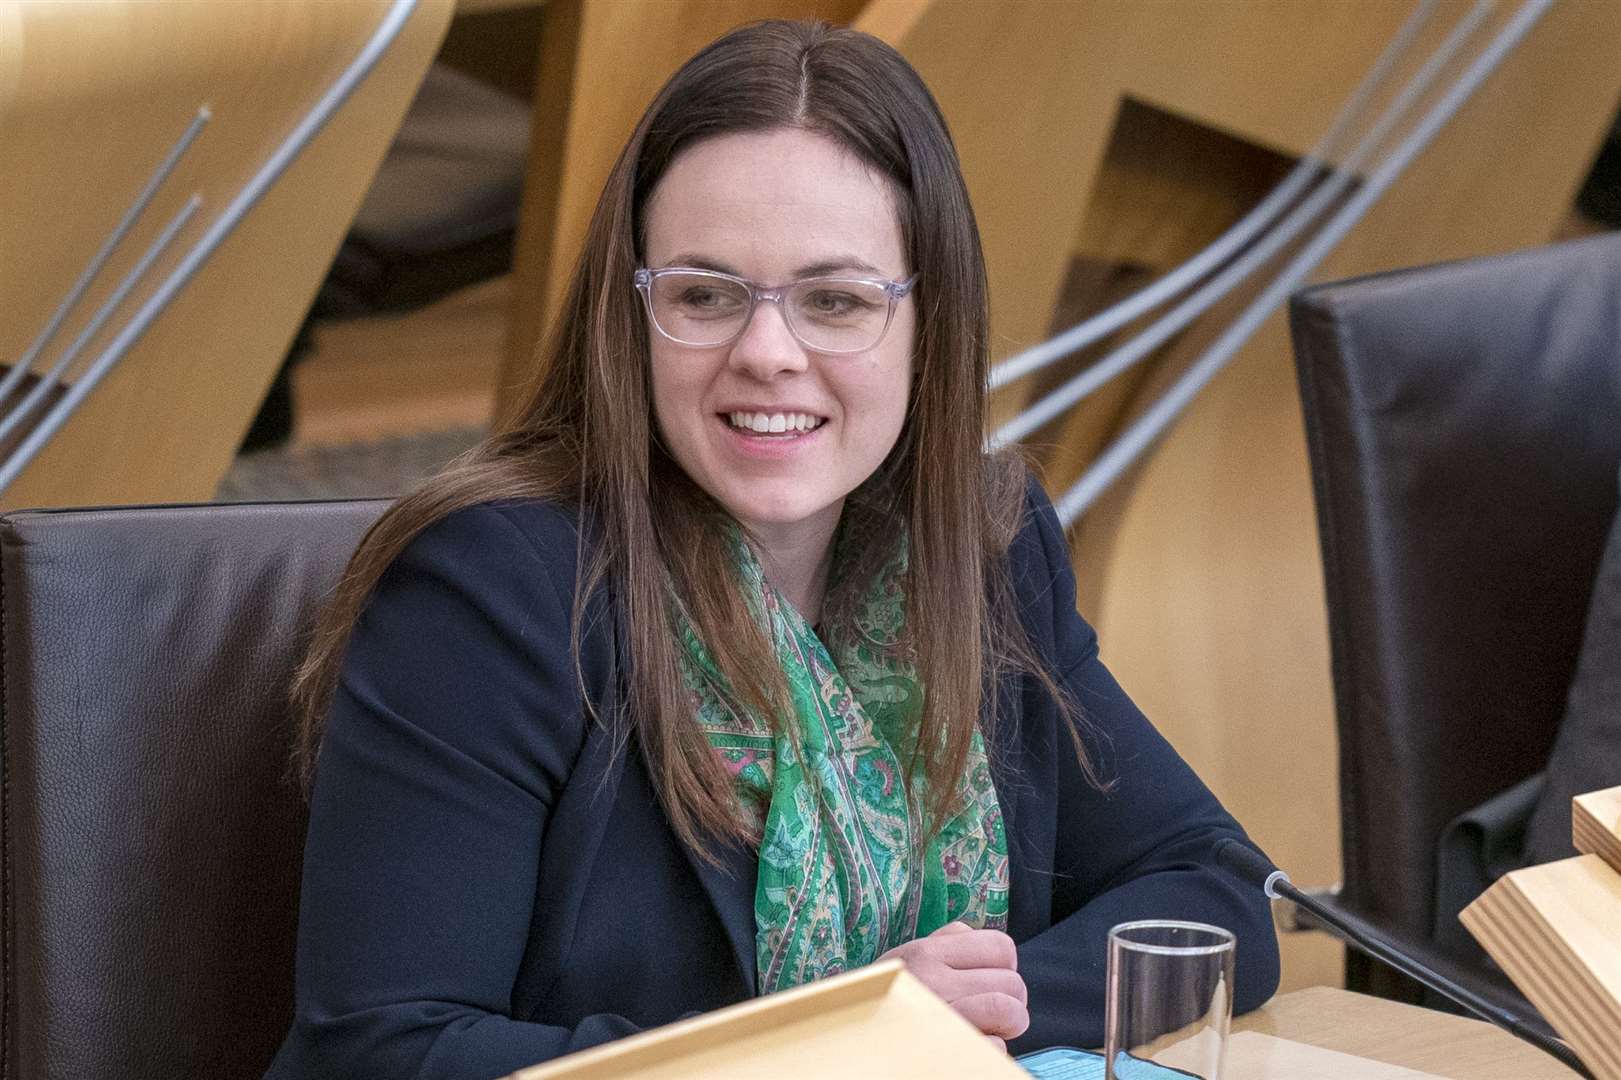 Kate Forbes in the Scottish Parliament chamber on Wednesday (Jane Barlow/PA)